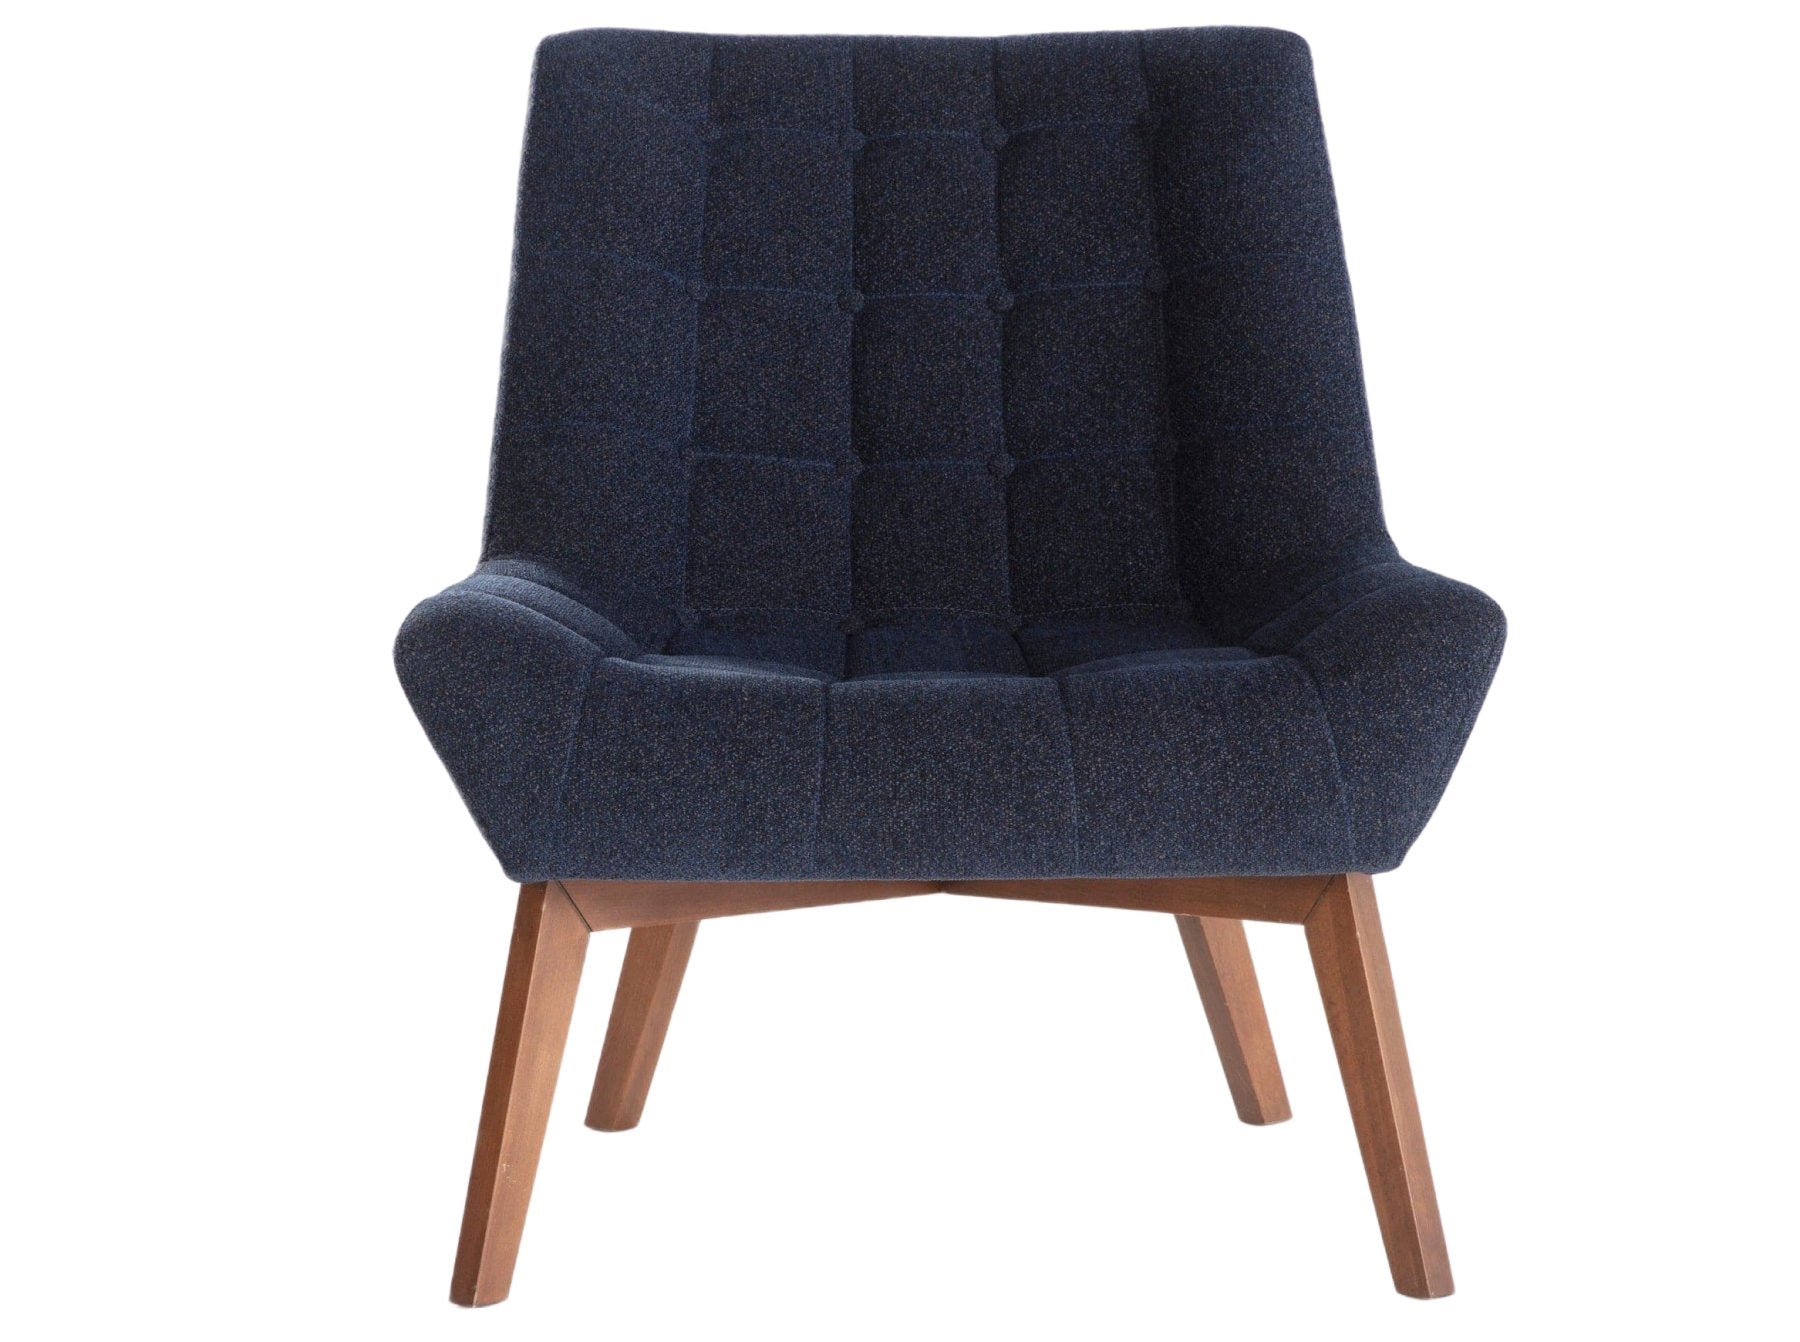 Revere Accent Chair by Bellona REVERE NAVY